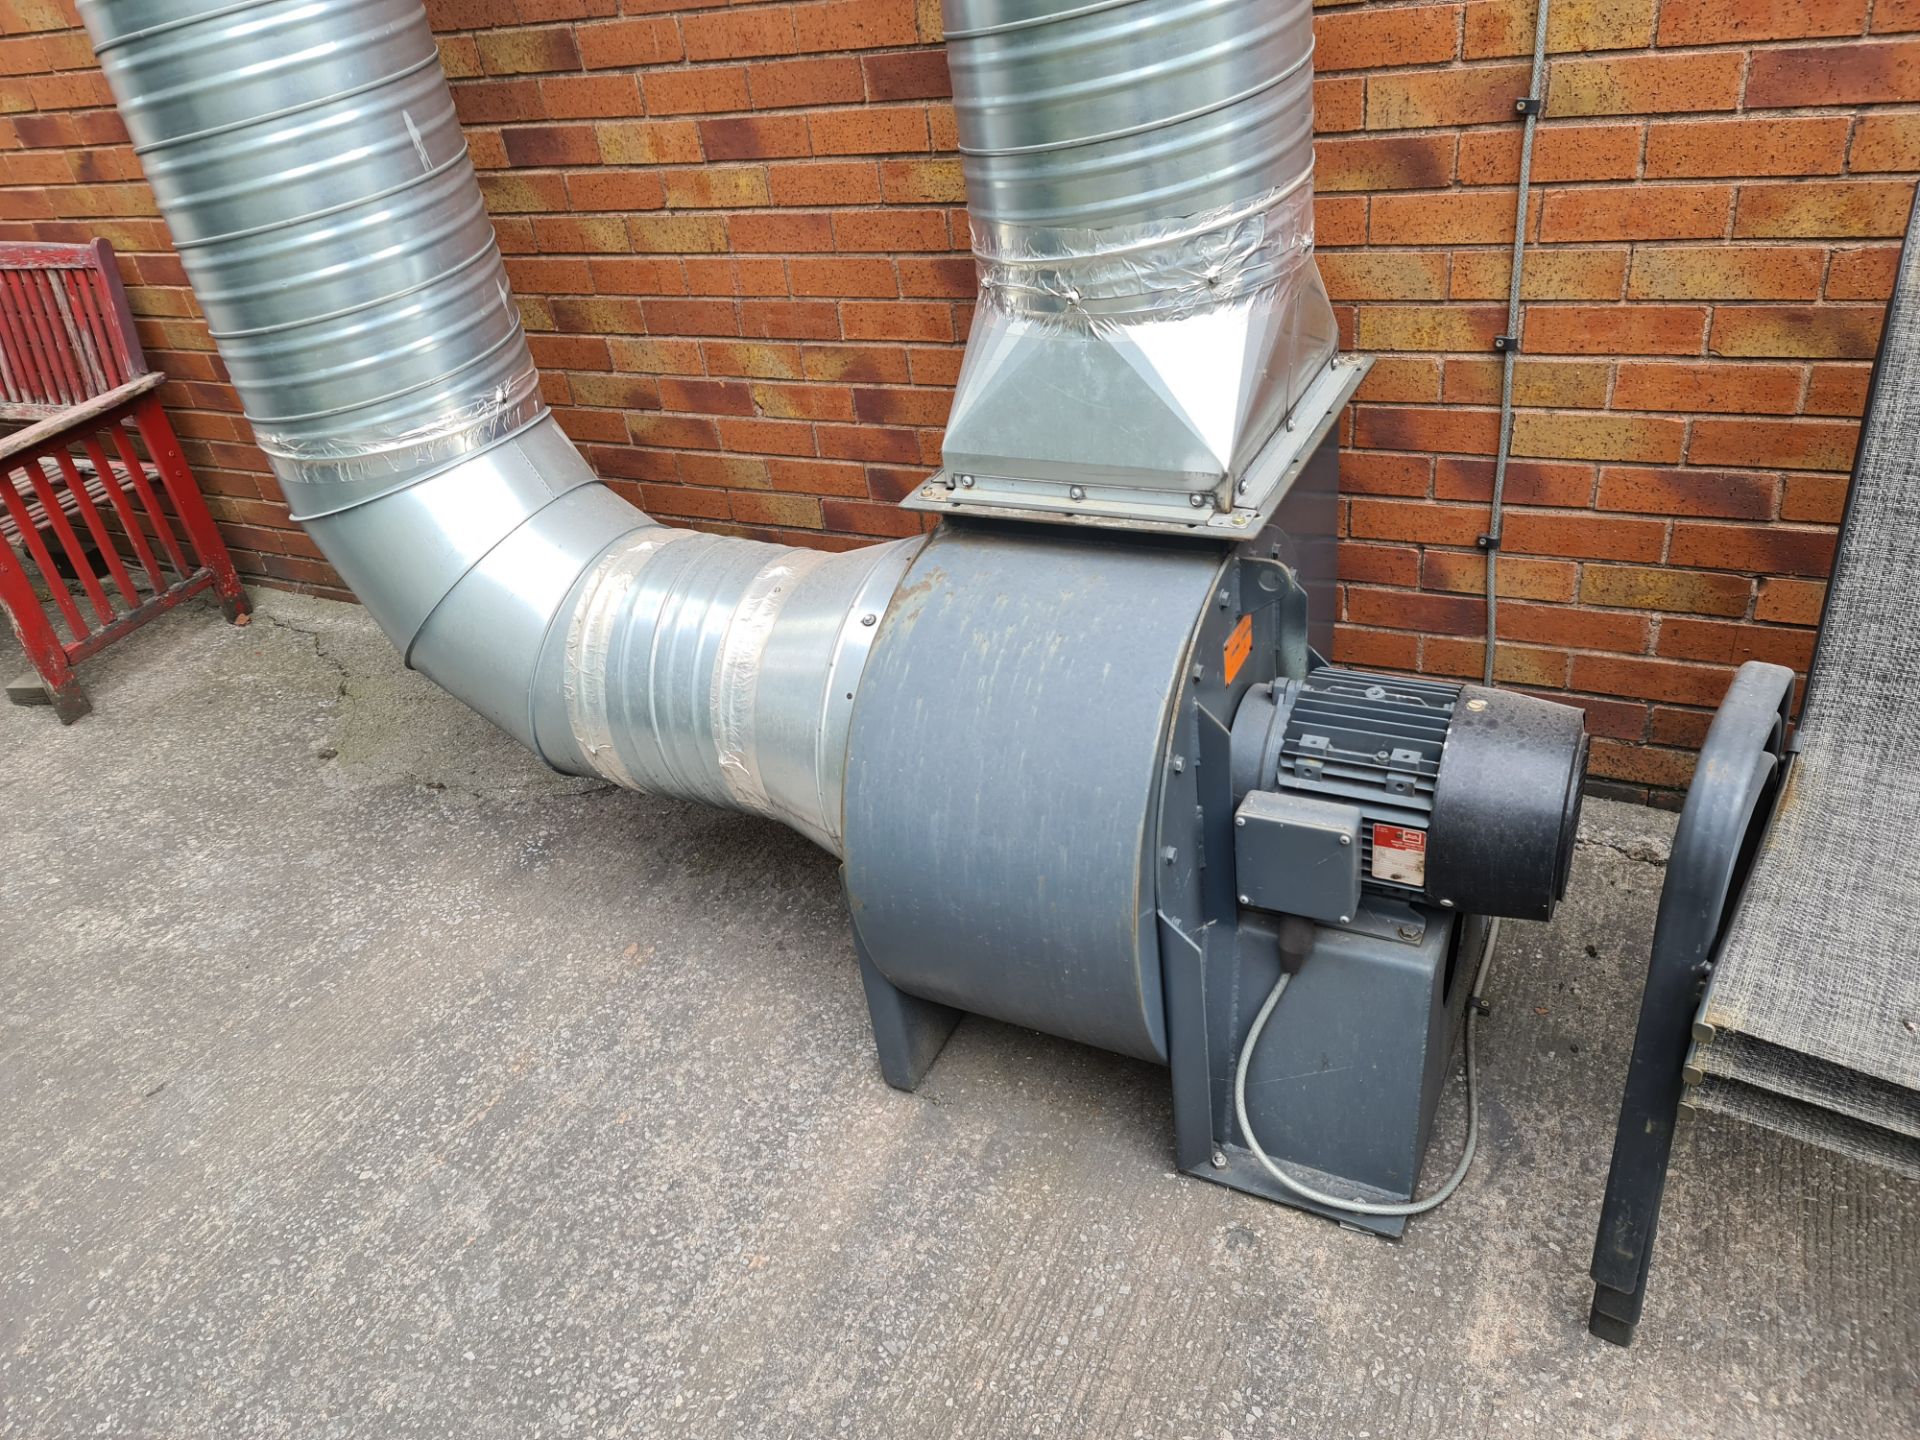 Extraction system comprising externally mounted motor & ducting, internally mounted ducting, 2 off w - Image 12 of 18